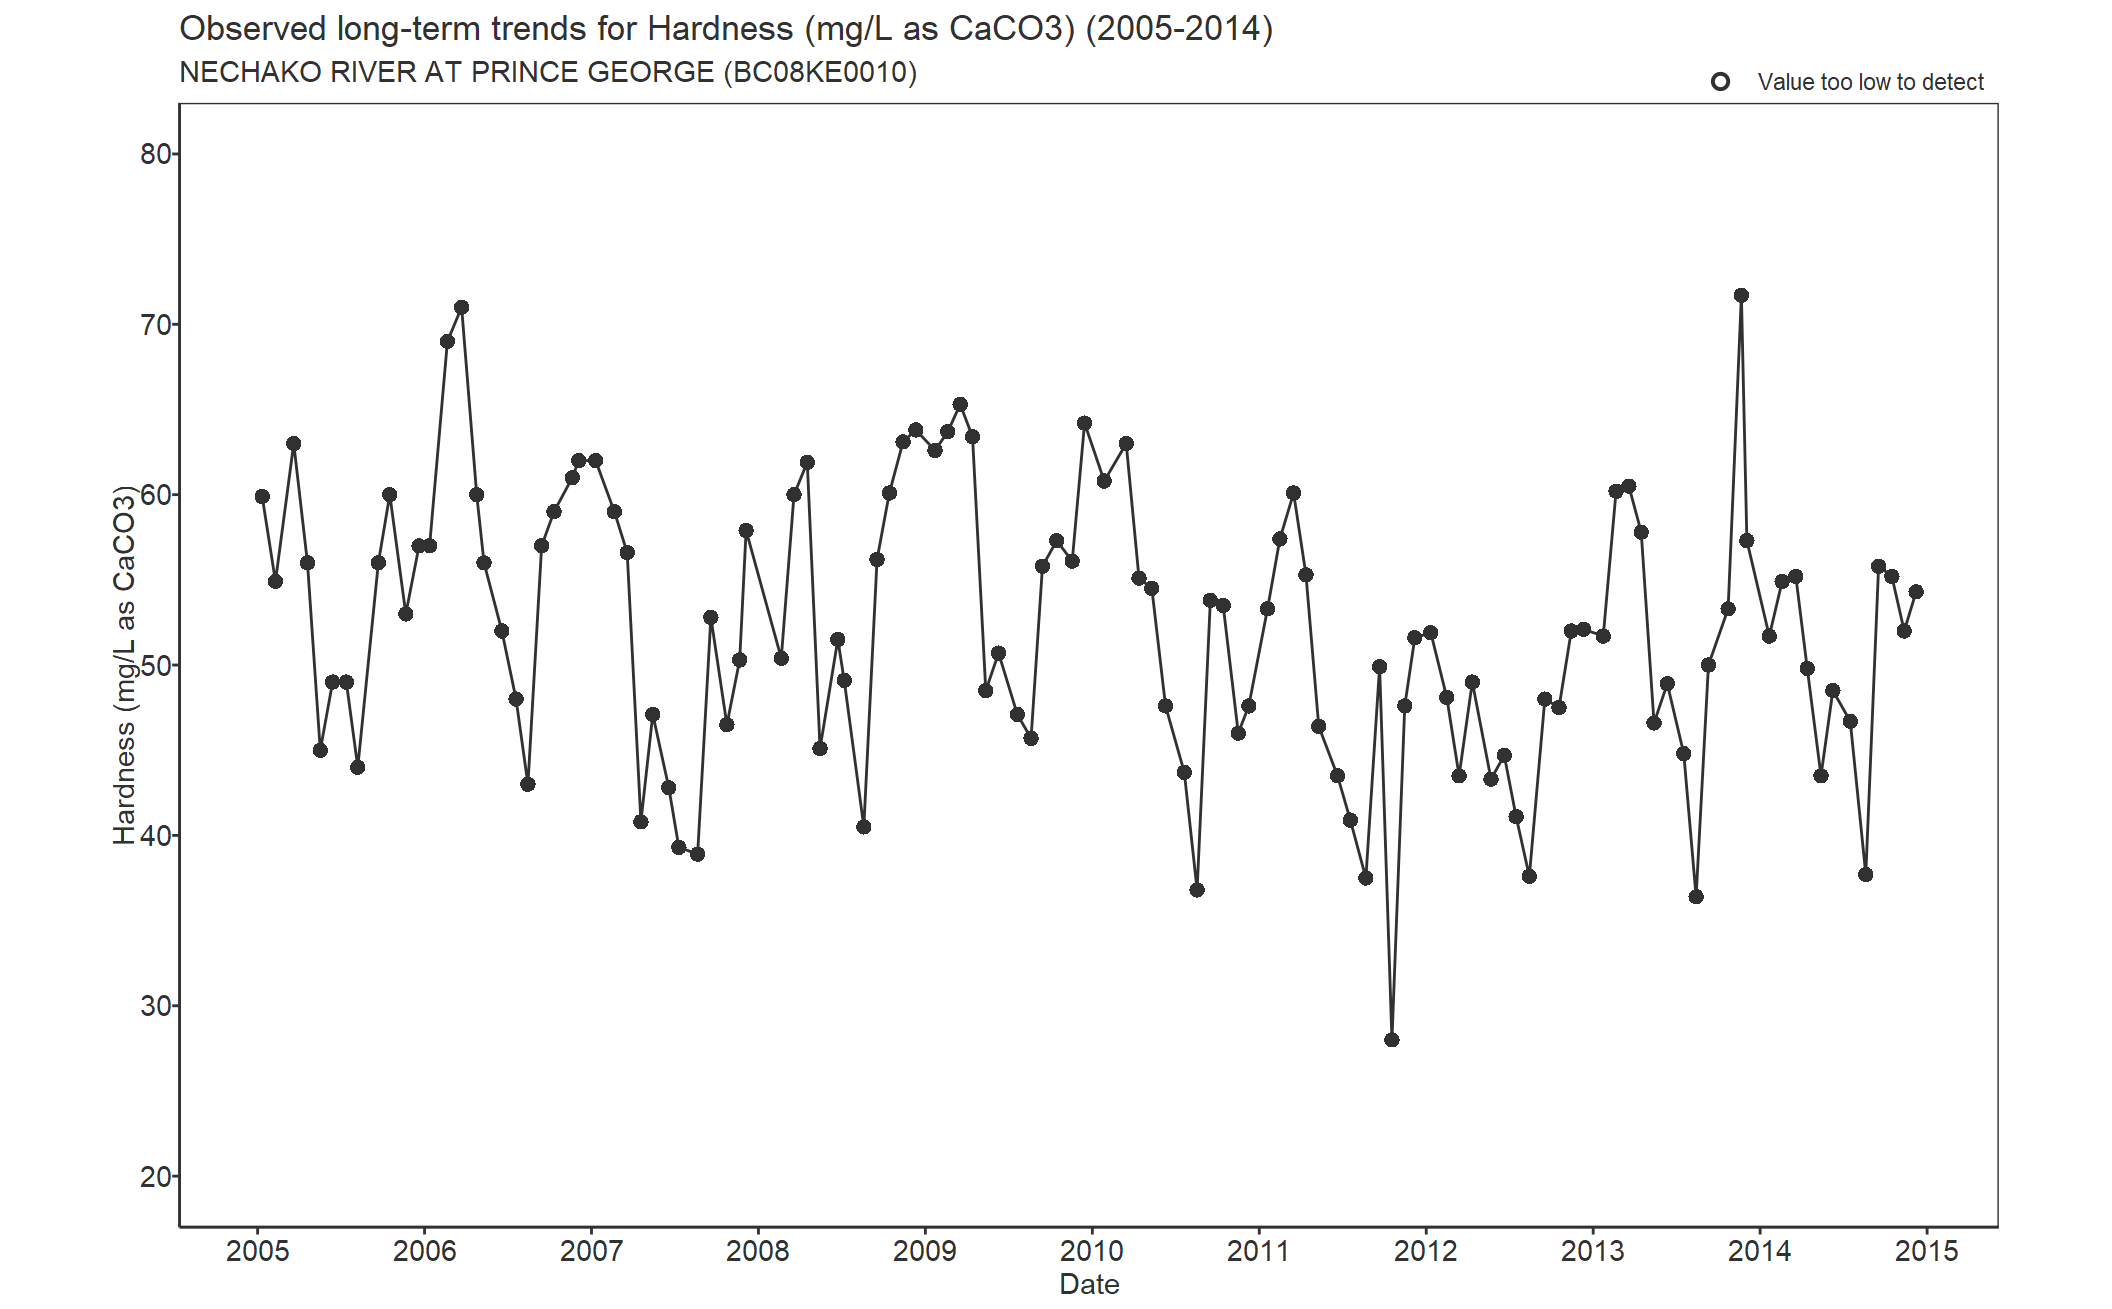 Observed long-term trends for Hardness Total CaCO3 (2005-2014)